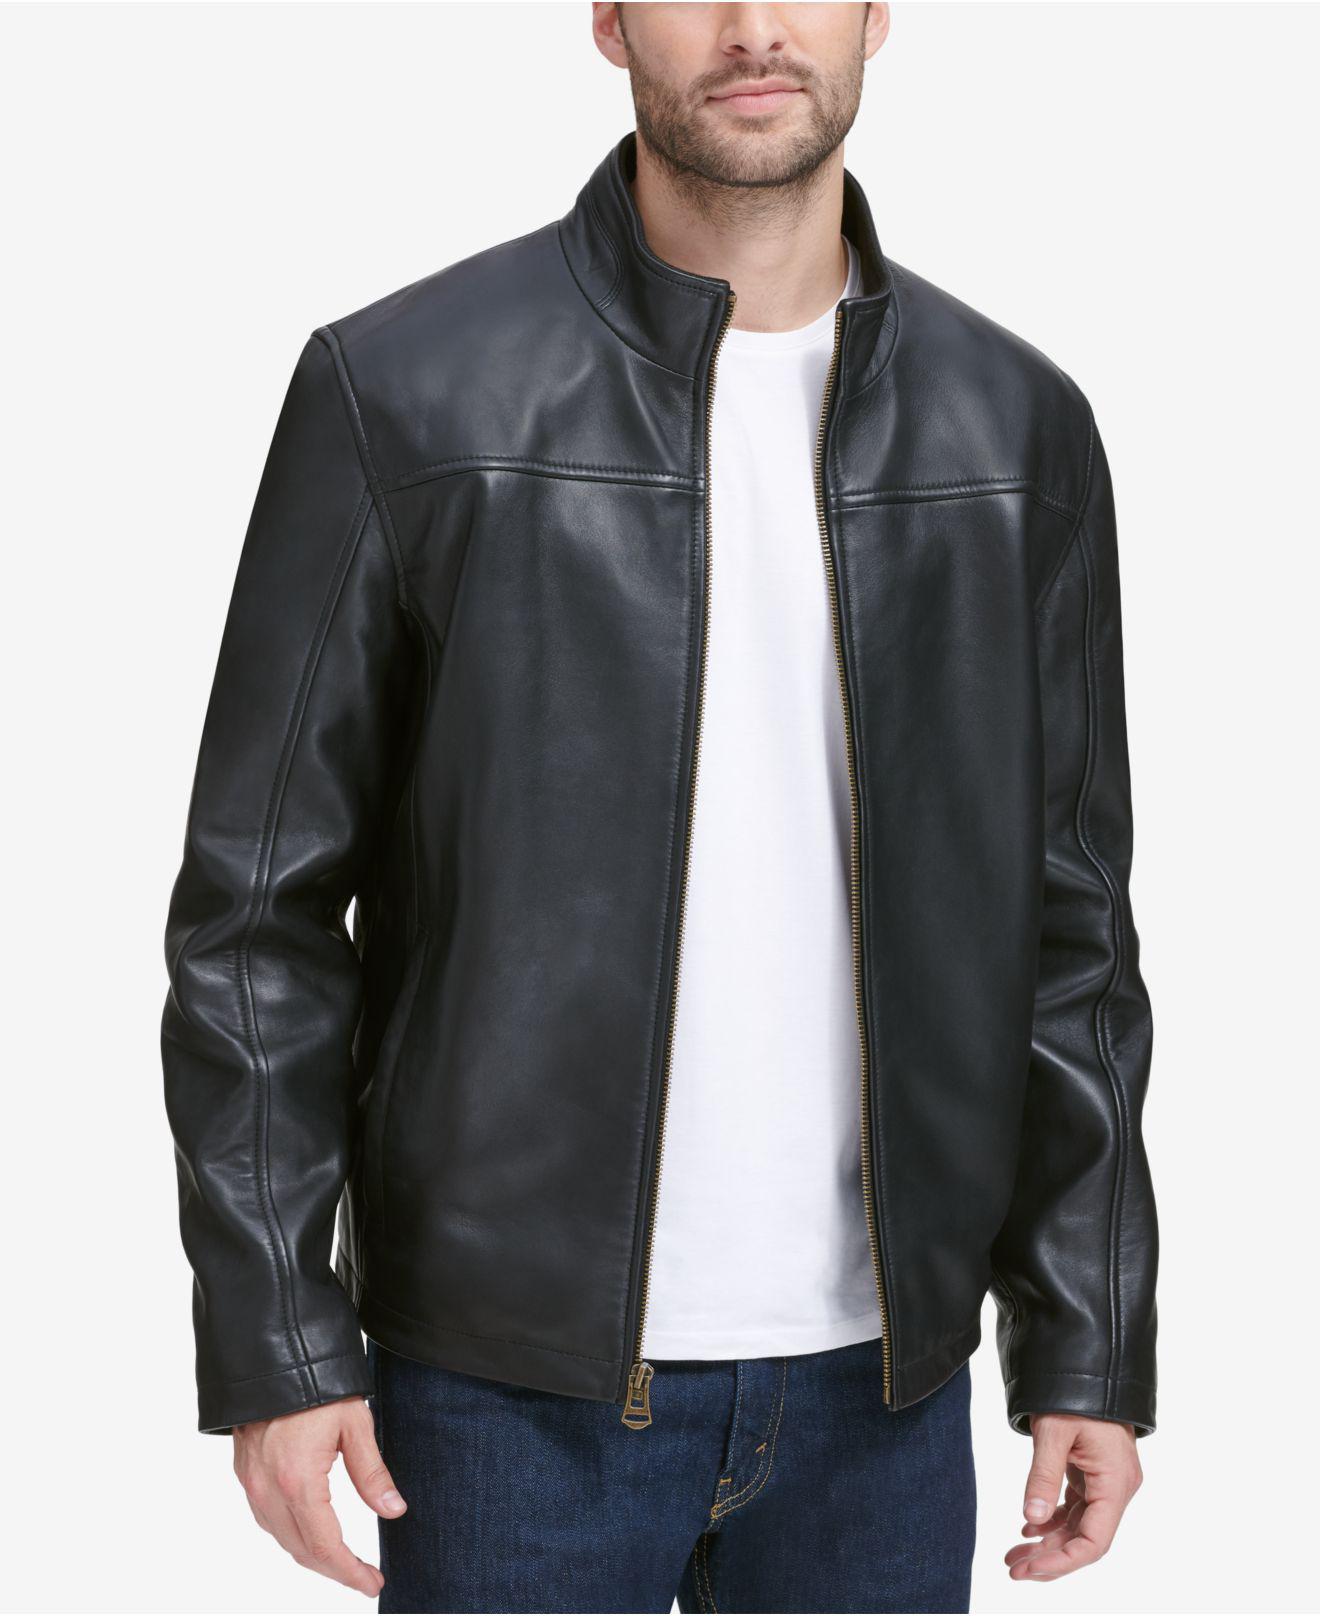 Cole Haan Leather Jacket in Black for Men - Save 33% - Lyst